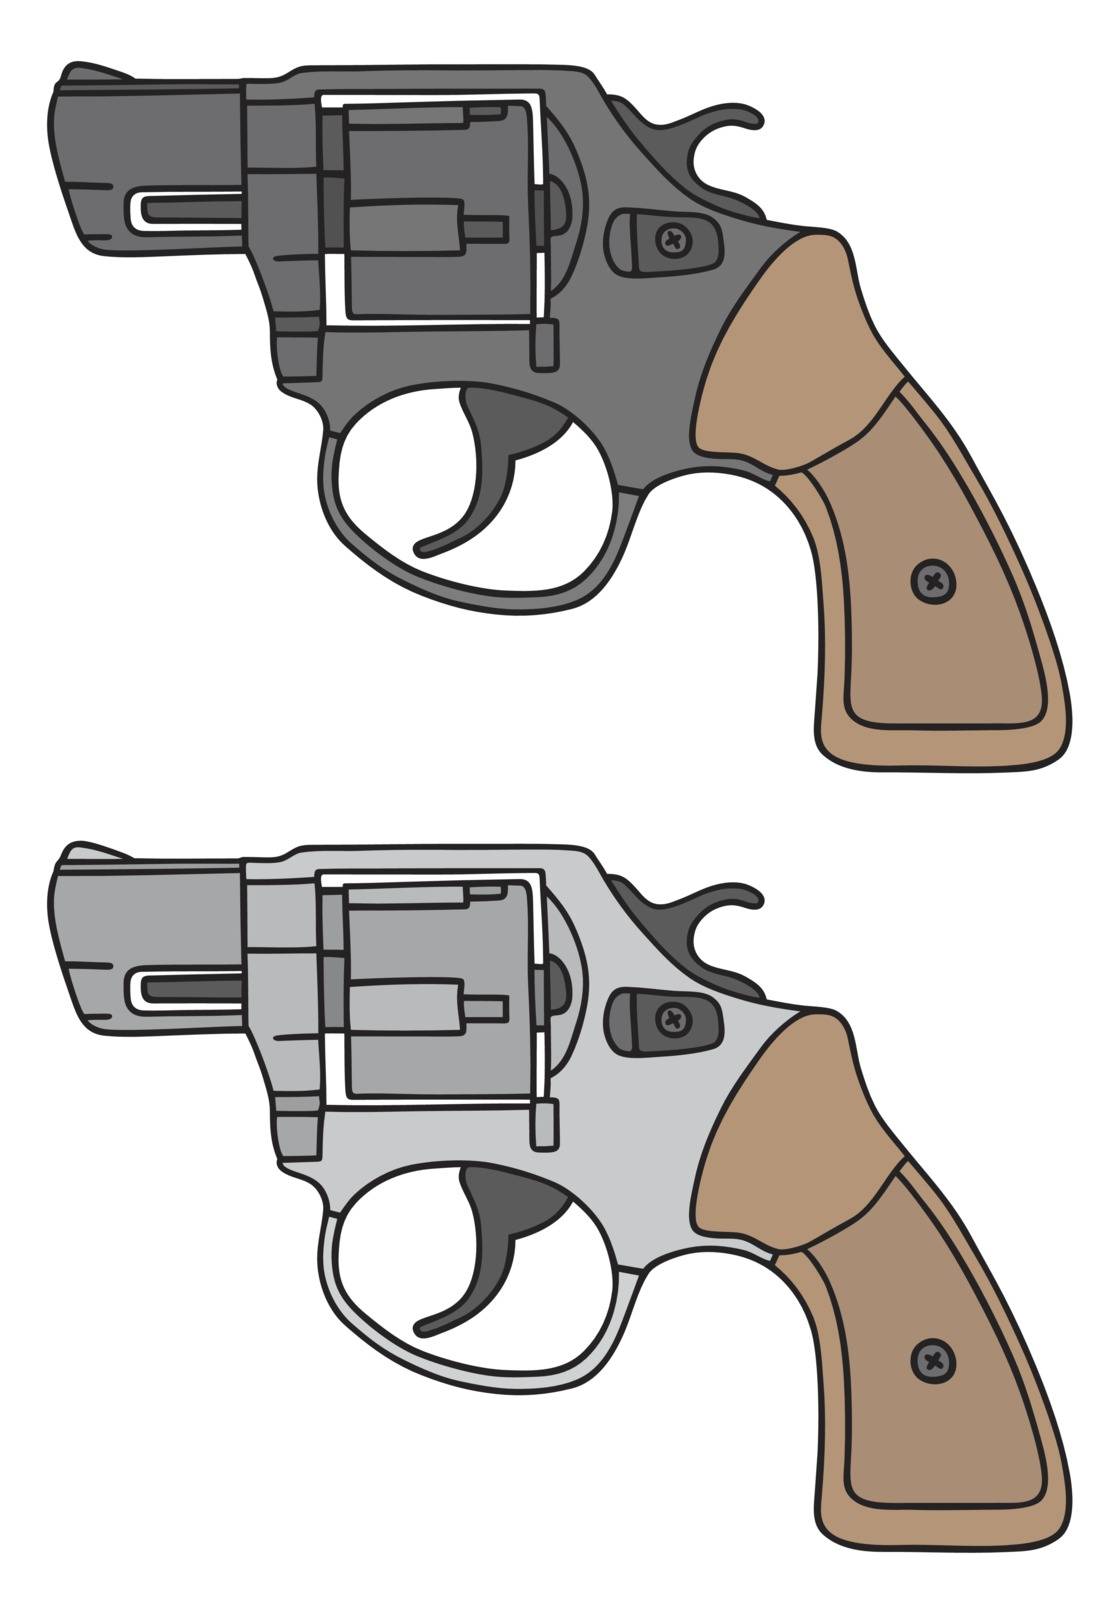 Classic short revolvers by vostal